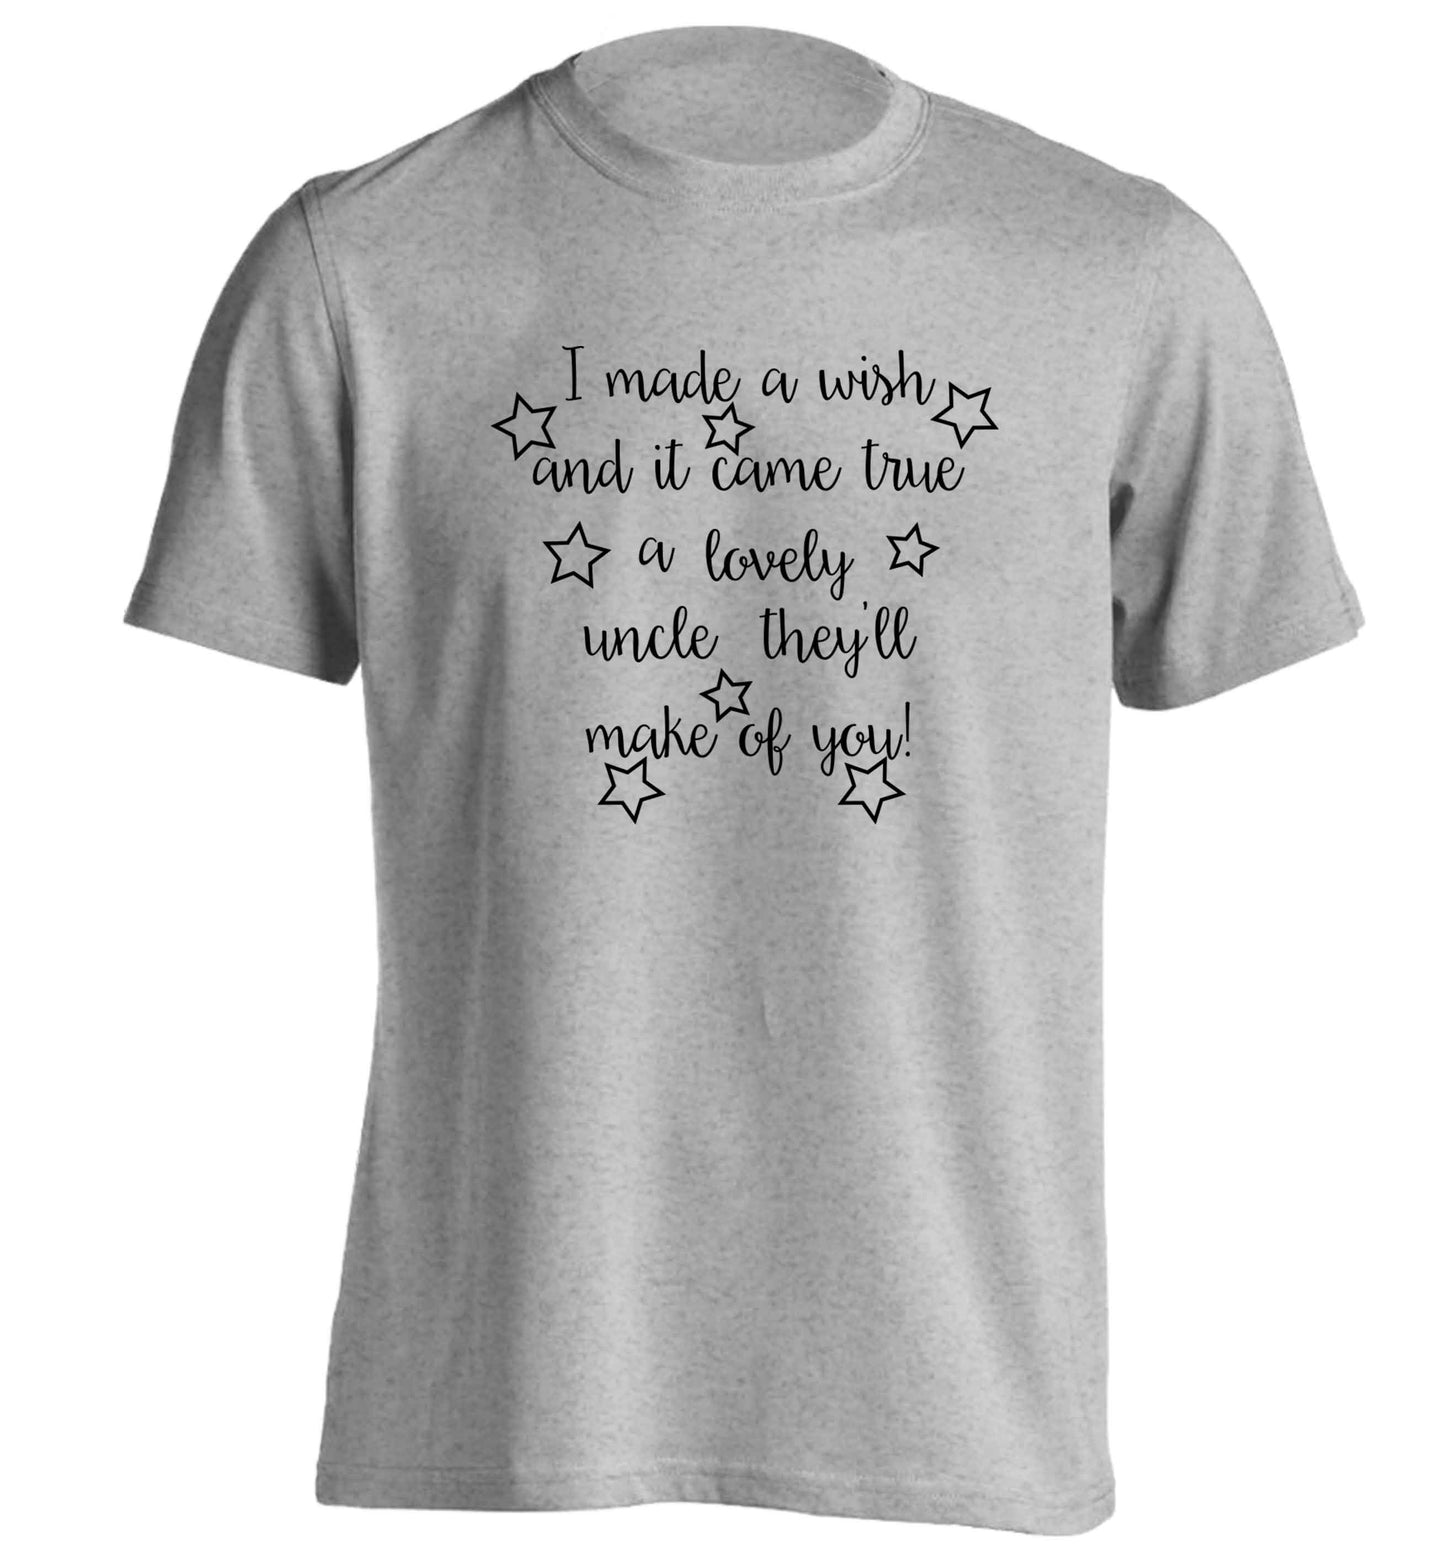 I made a wish and it came true a lovely uncle they'll make of you! adults unisex grey Tshirt 2XL